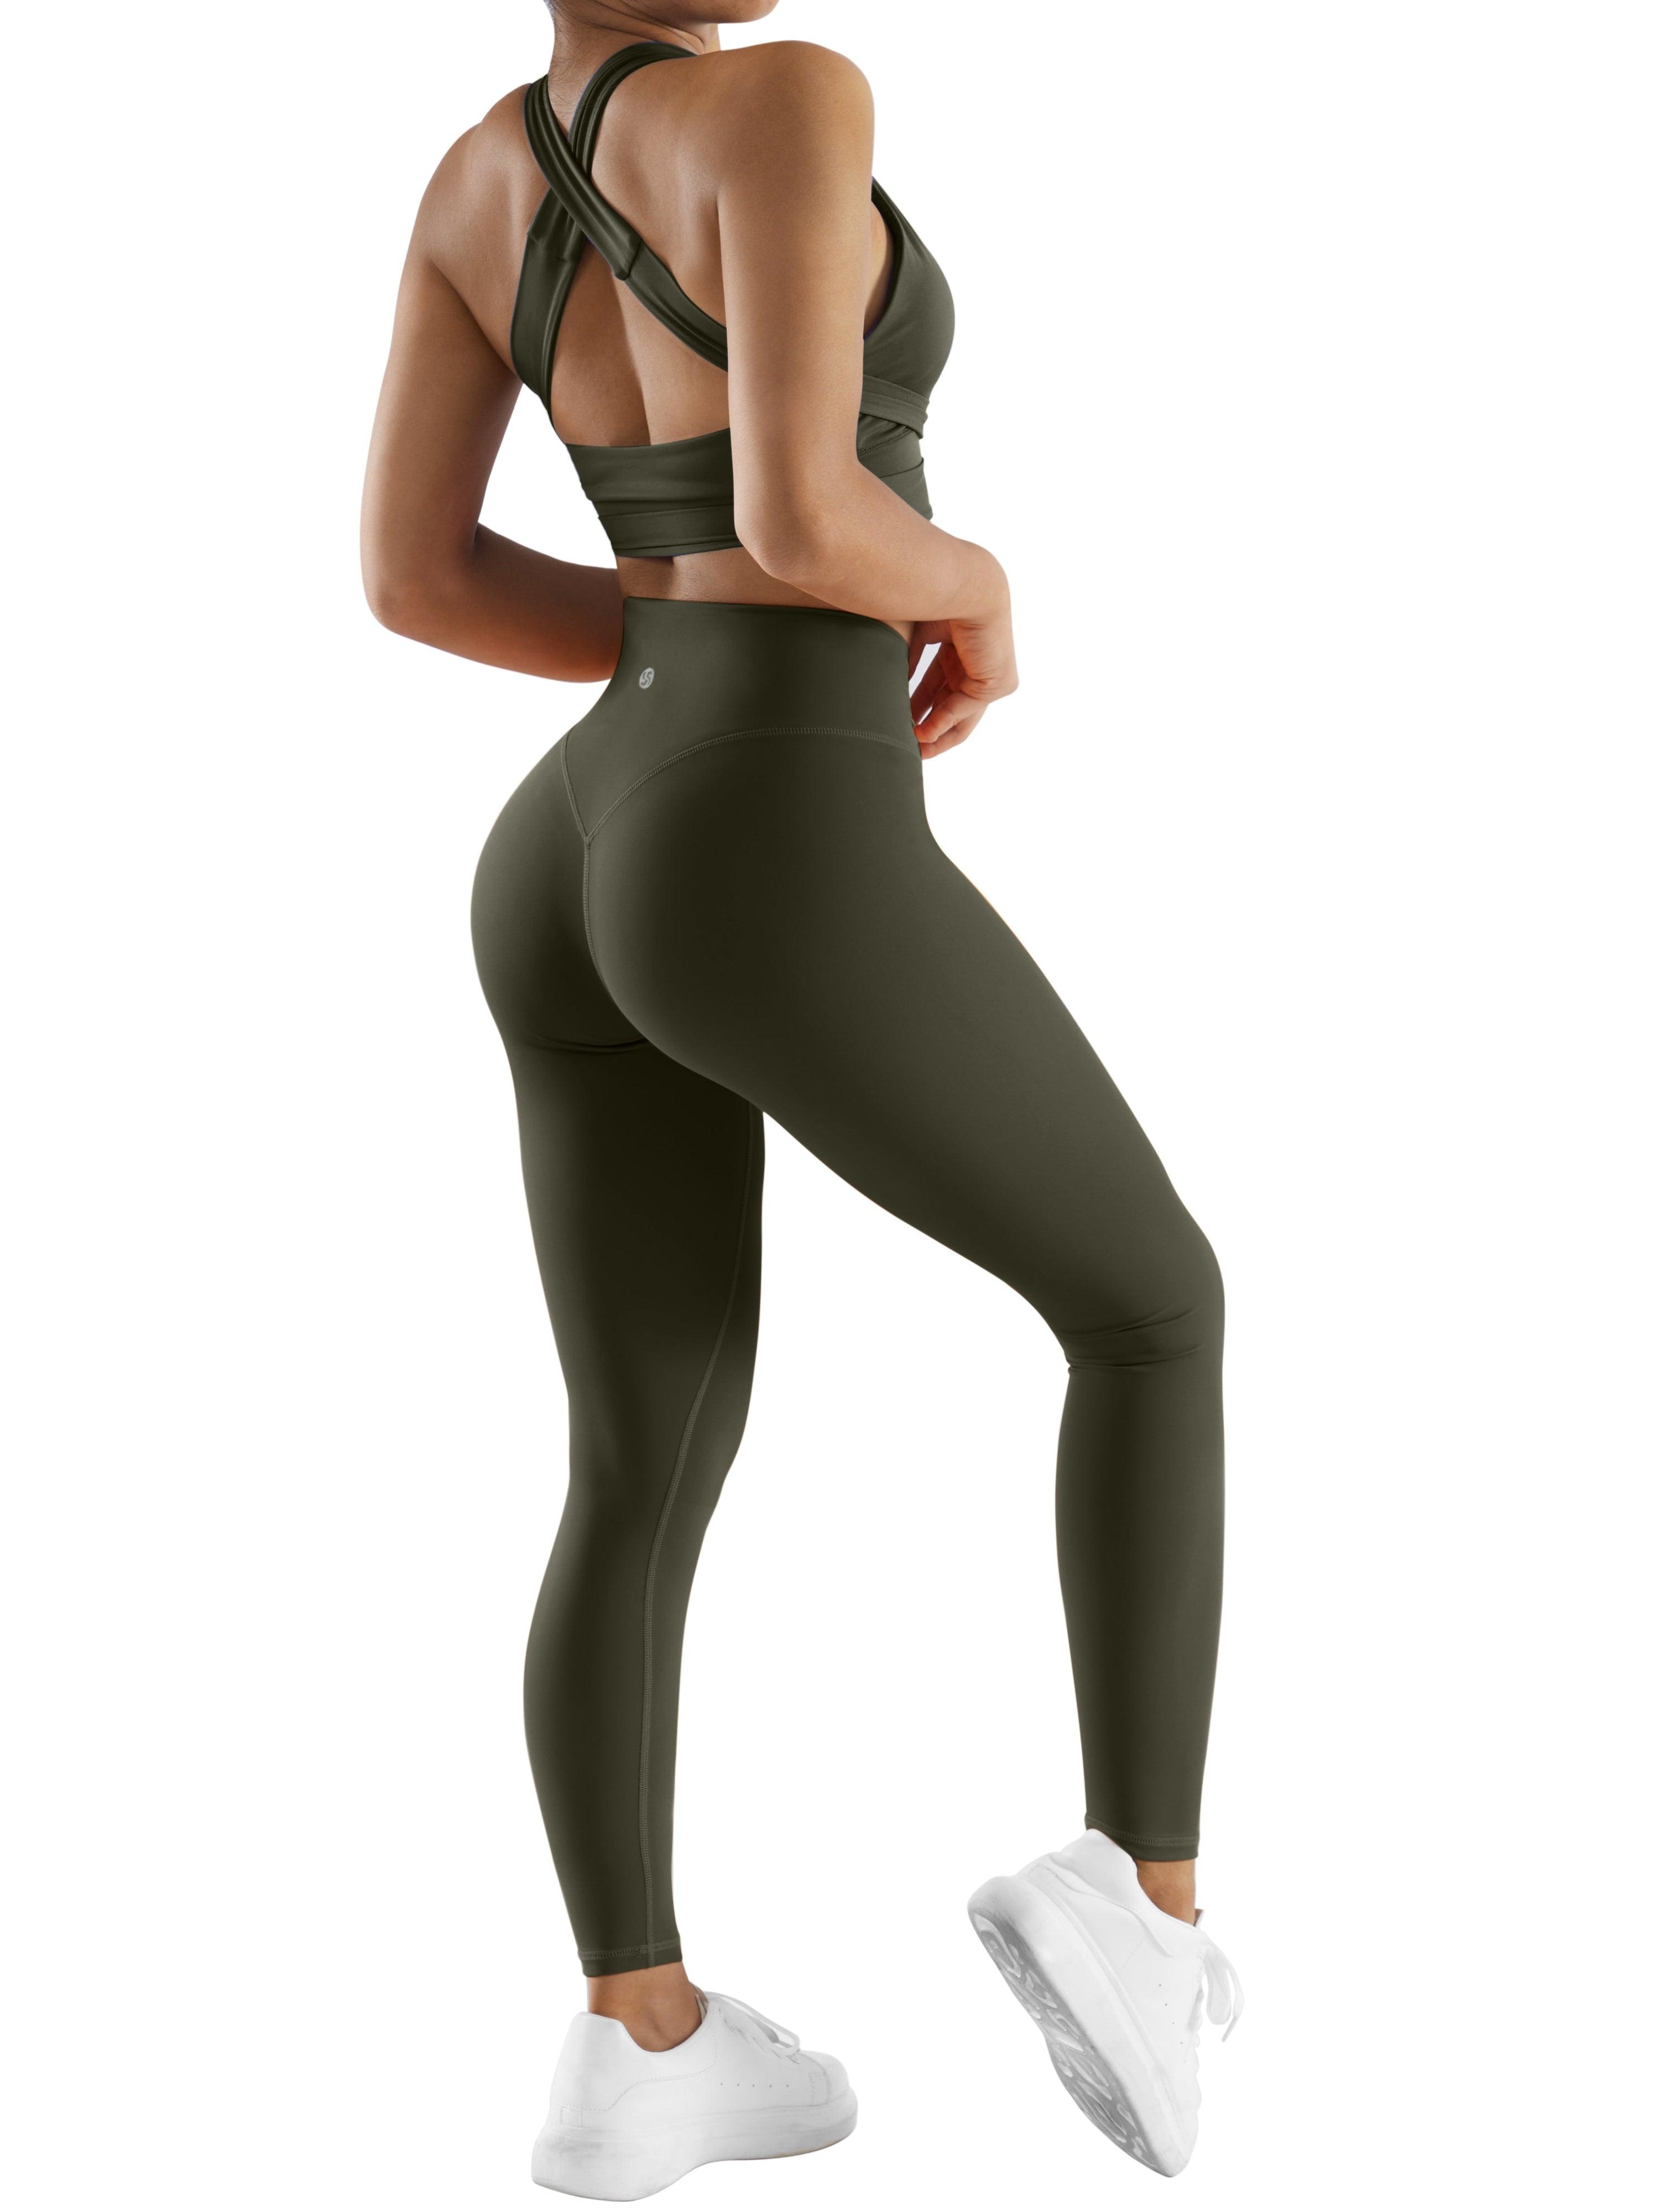 Women's Buttery Ultra Soft Premium Leggings Solid Colors combined Shipping  Discount -  Singapore